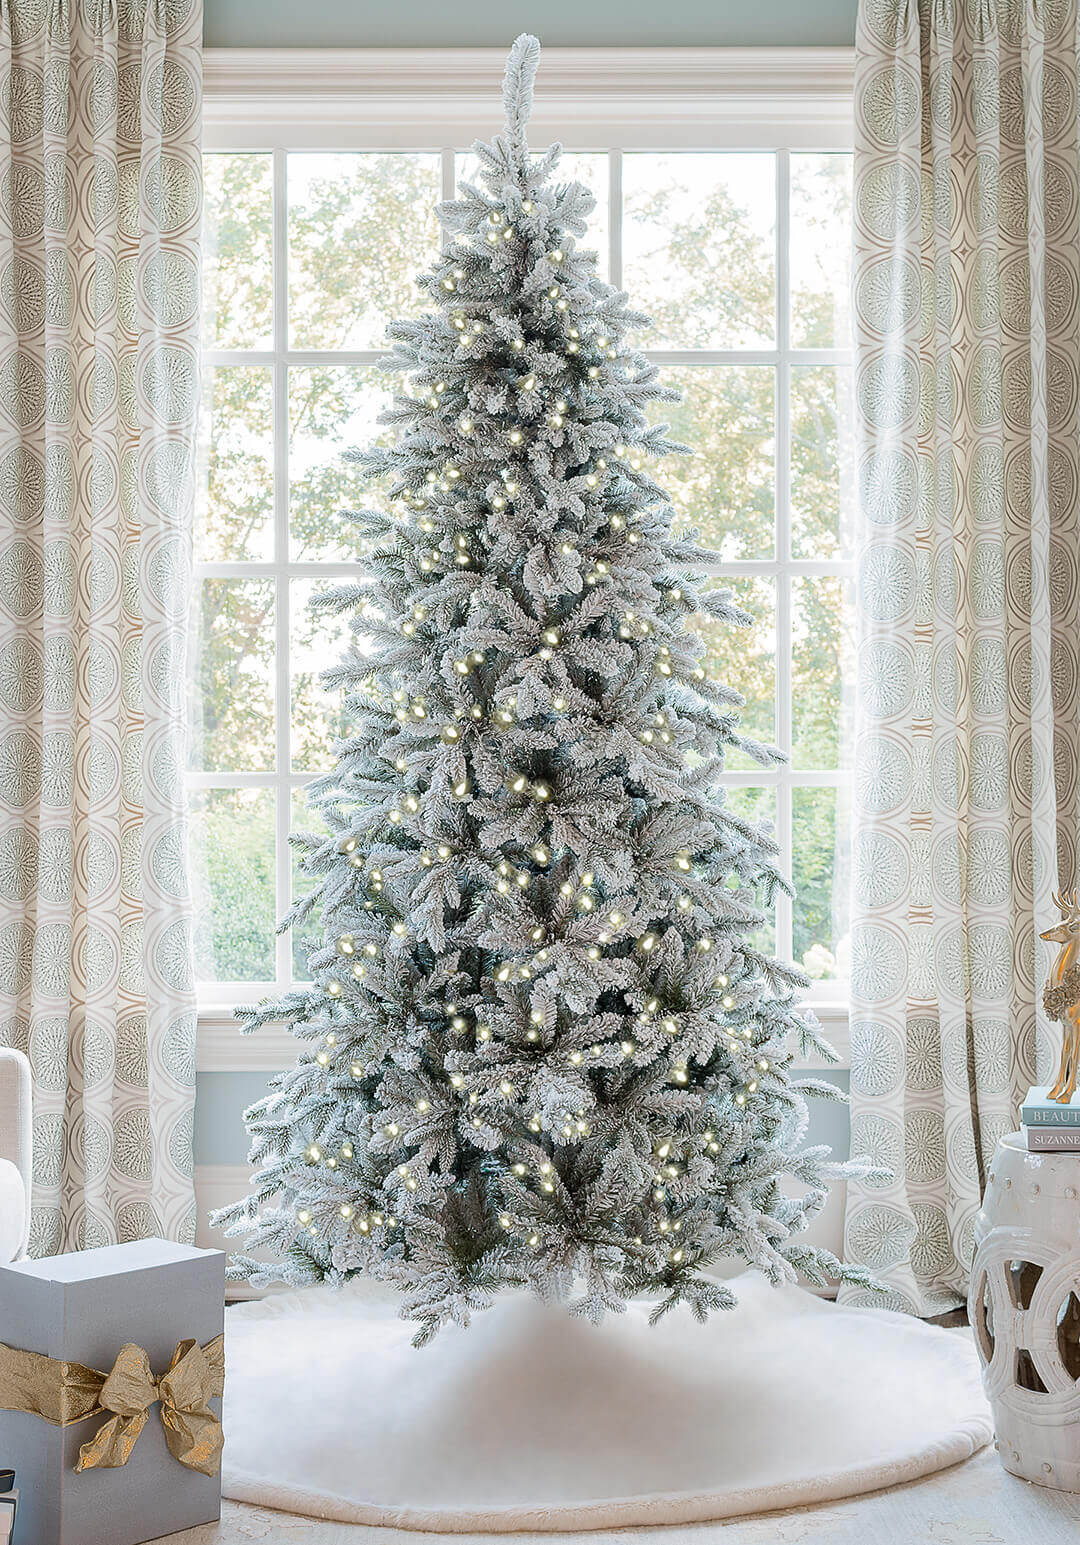 How to Flock a Real or Fake Christmas Tree